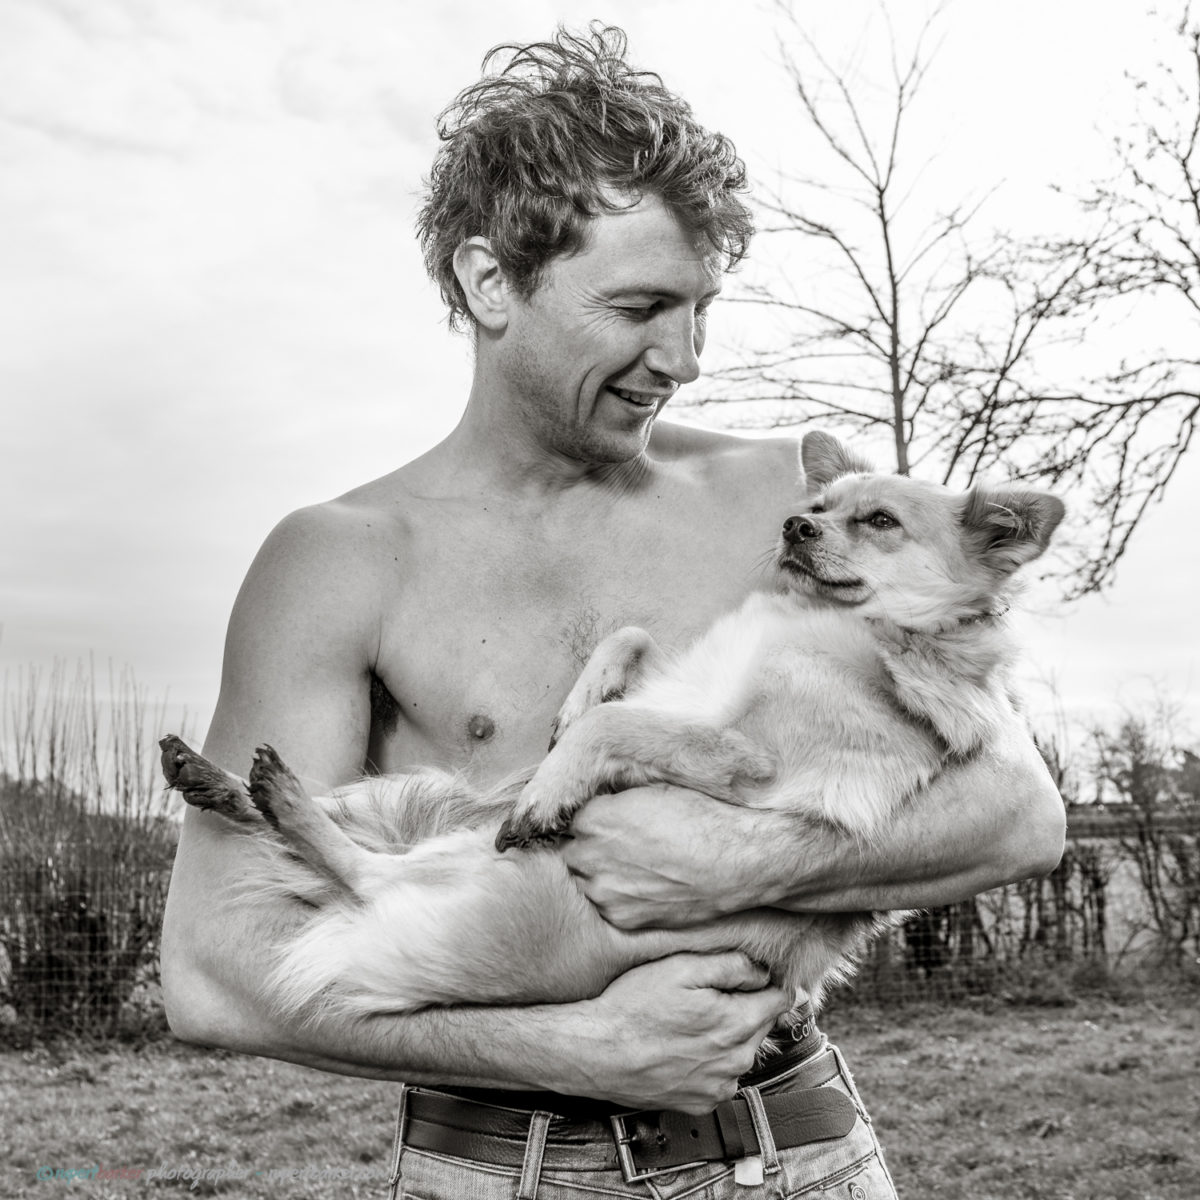 Topless Male Portrait with dog Black and White Calendar shoot